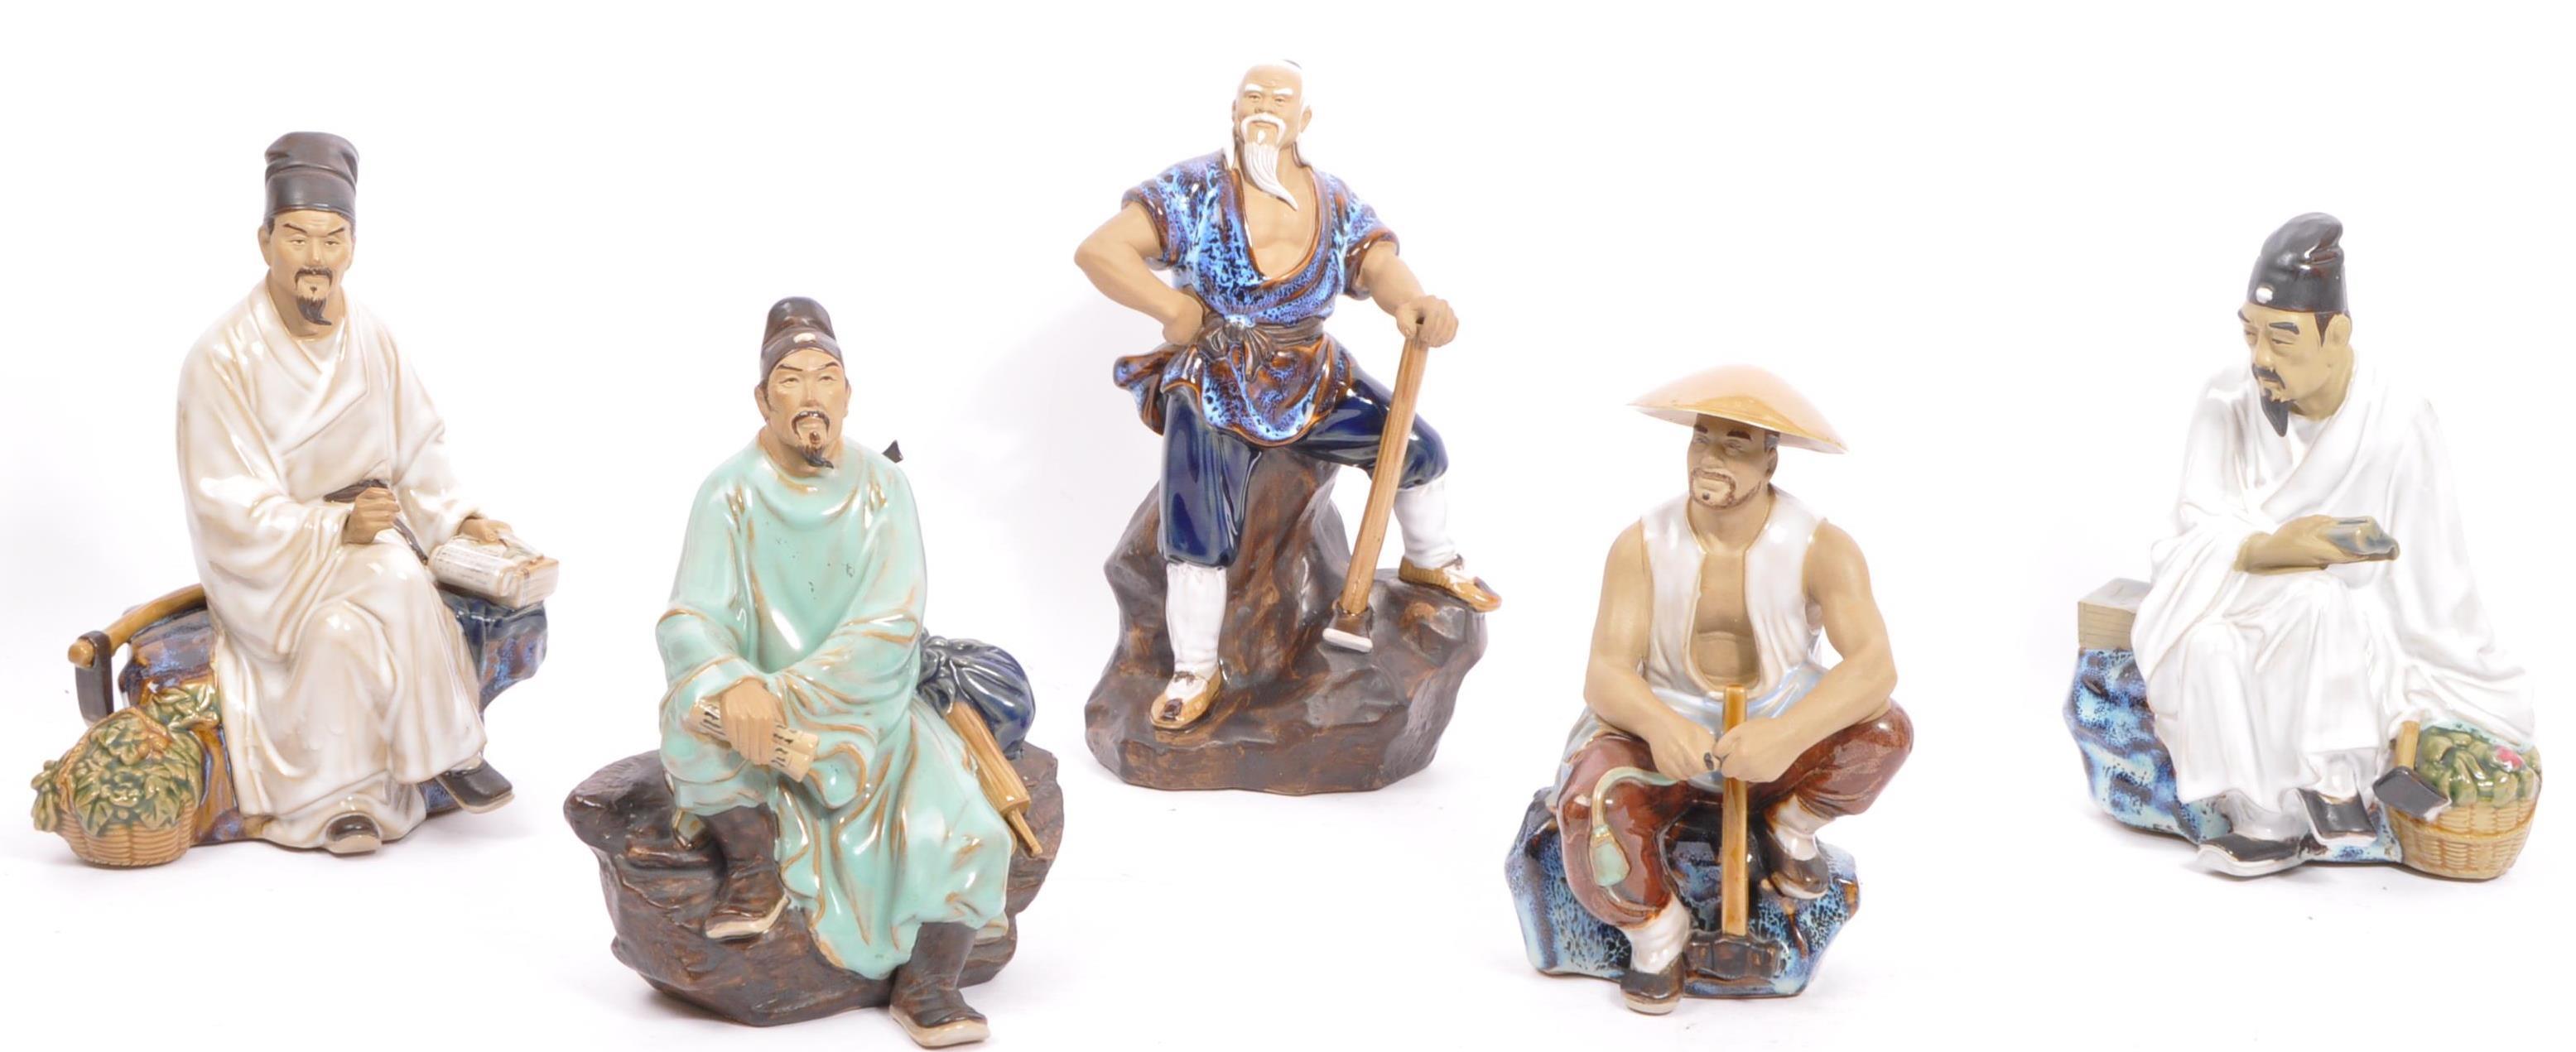 COLLECTION OF VINTAGE 20TH CENTURY SHIWAN CERAMIC FIGURES